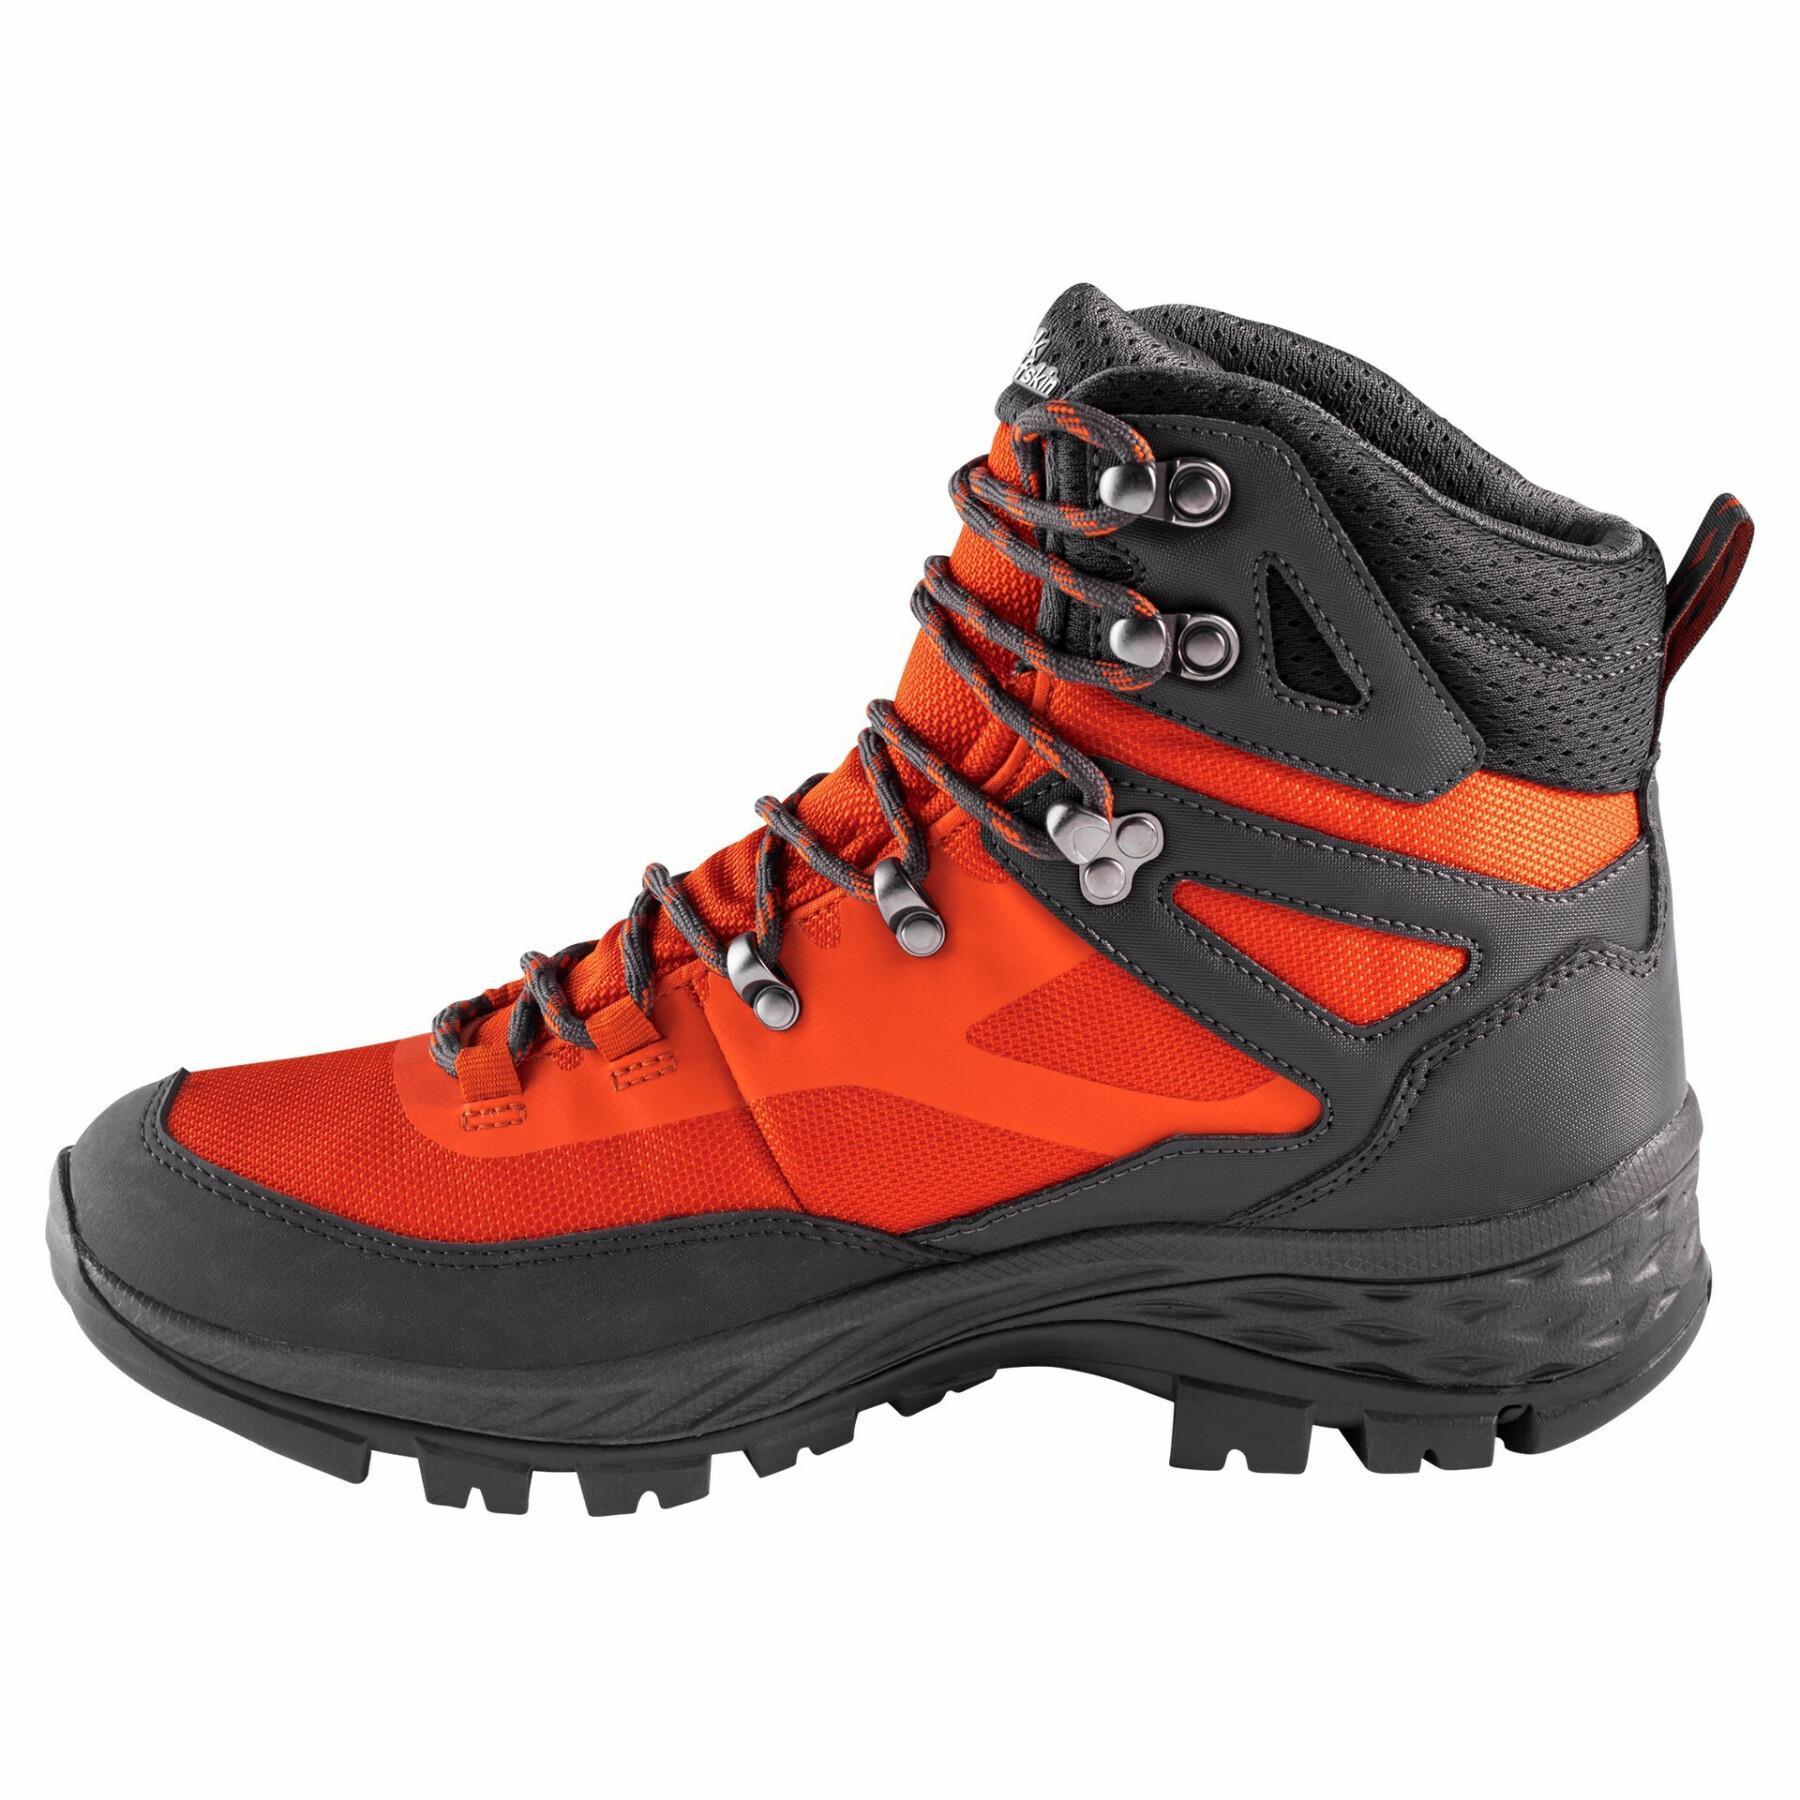 Hiking shoes Jack Wolfskin Rebellion Guide Texaporeid Mid